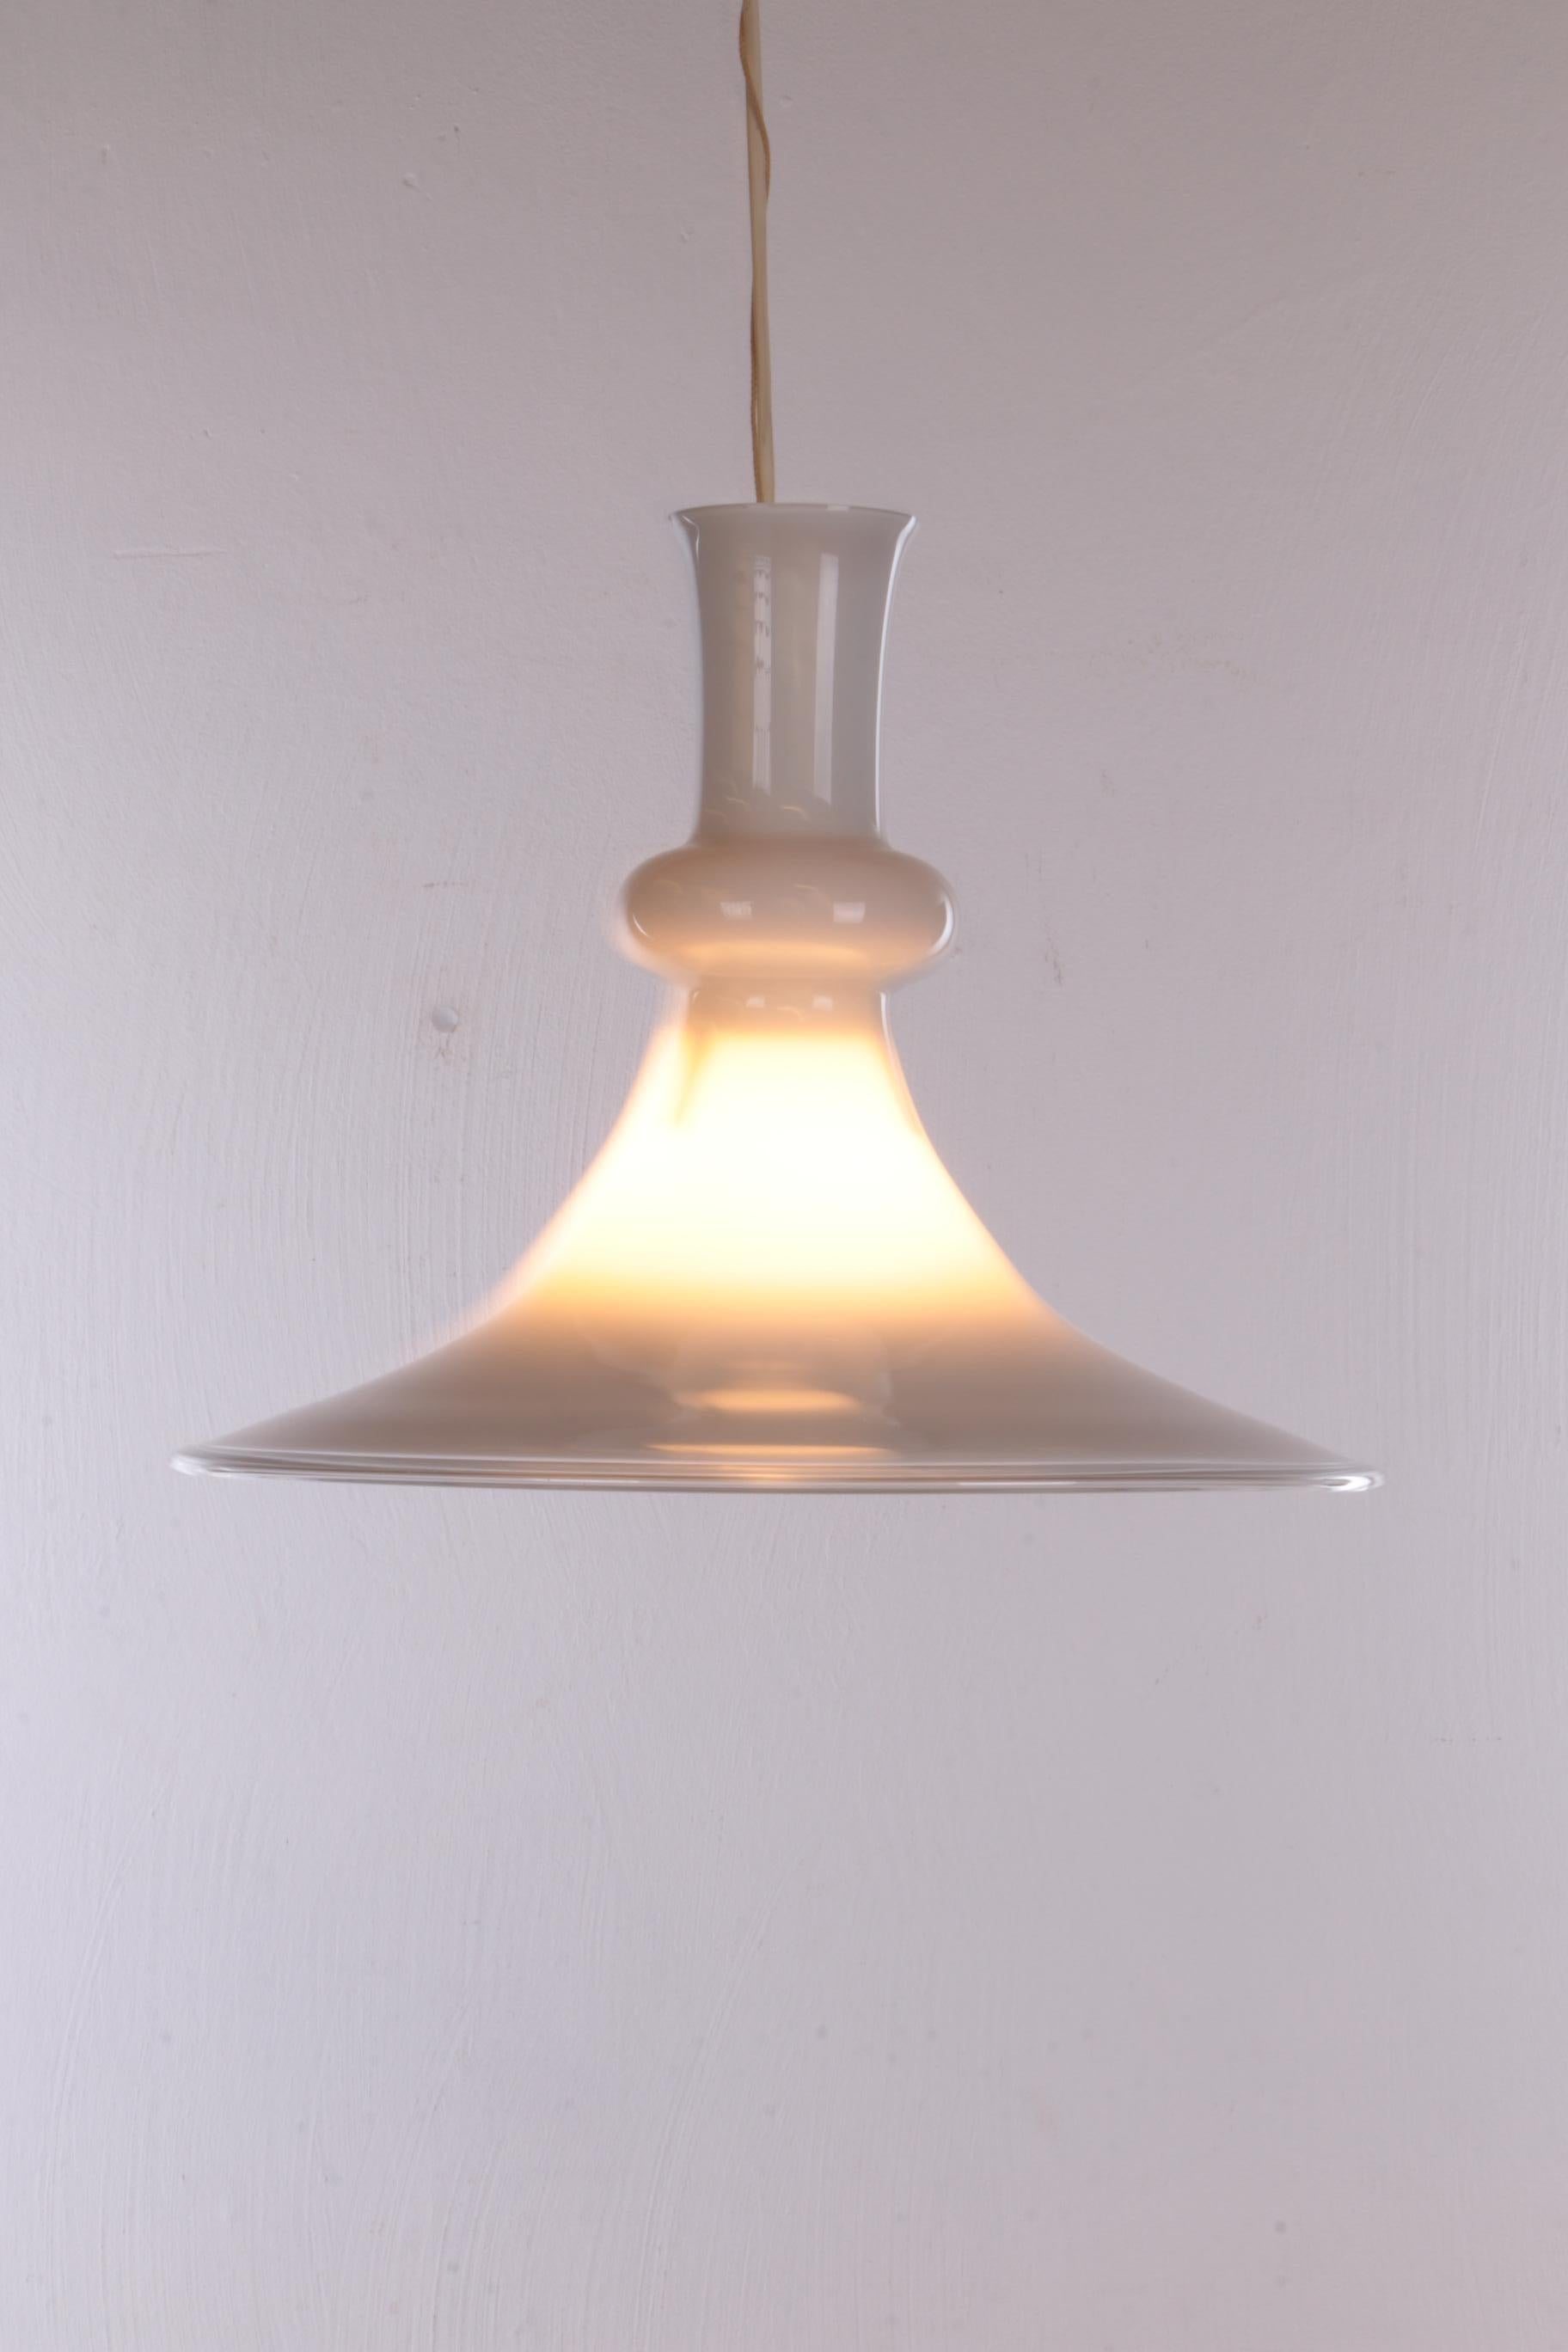 White mouth-blown opaline glass pendant by Michael Bang for Holmegaard, Denmark, 1980s

A rare modernist ceiling lamp in a simple, elegant shape - produced by Holmegaard/Royal Copenhagen GLASSWORKS, Origin: Denmark Time: